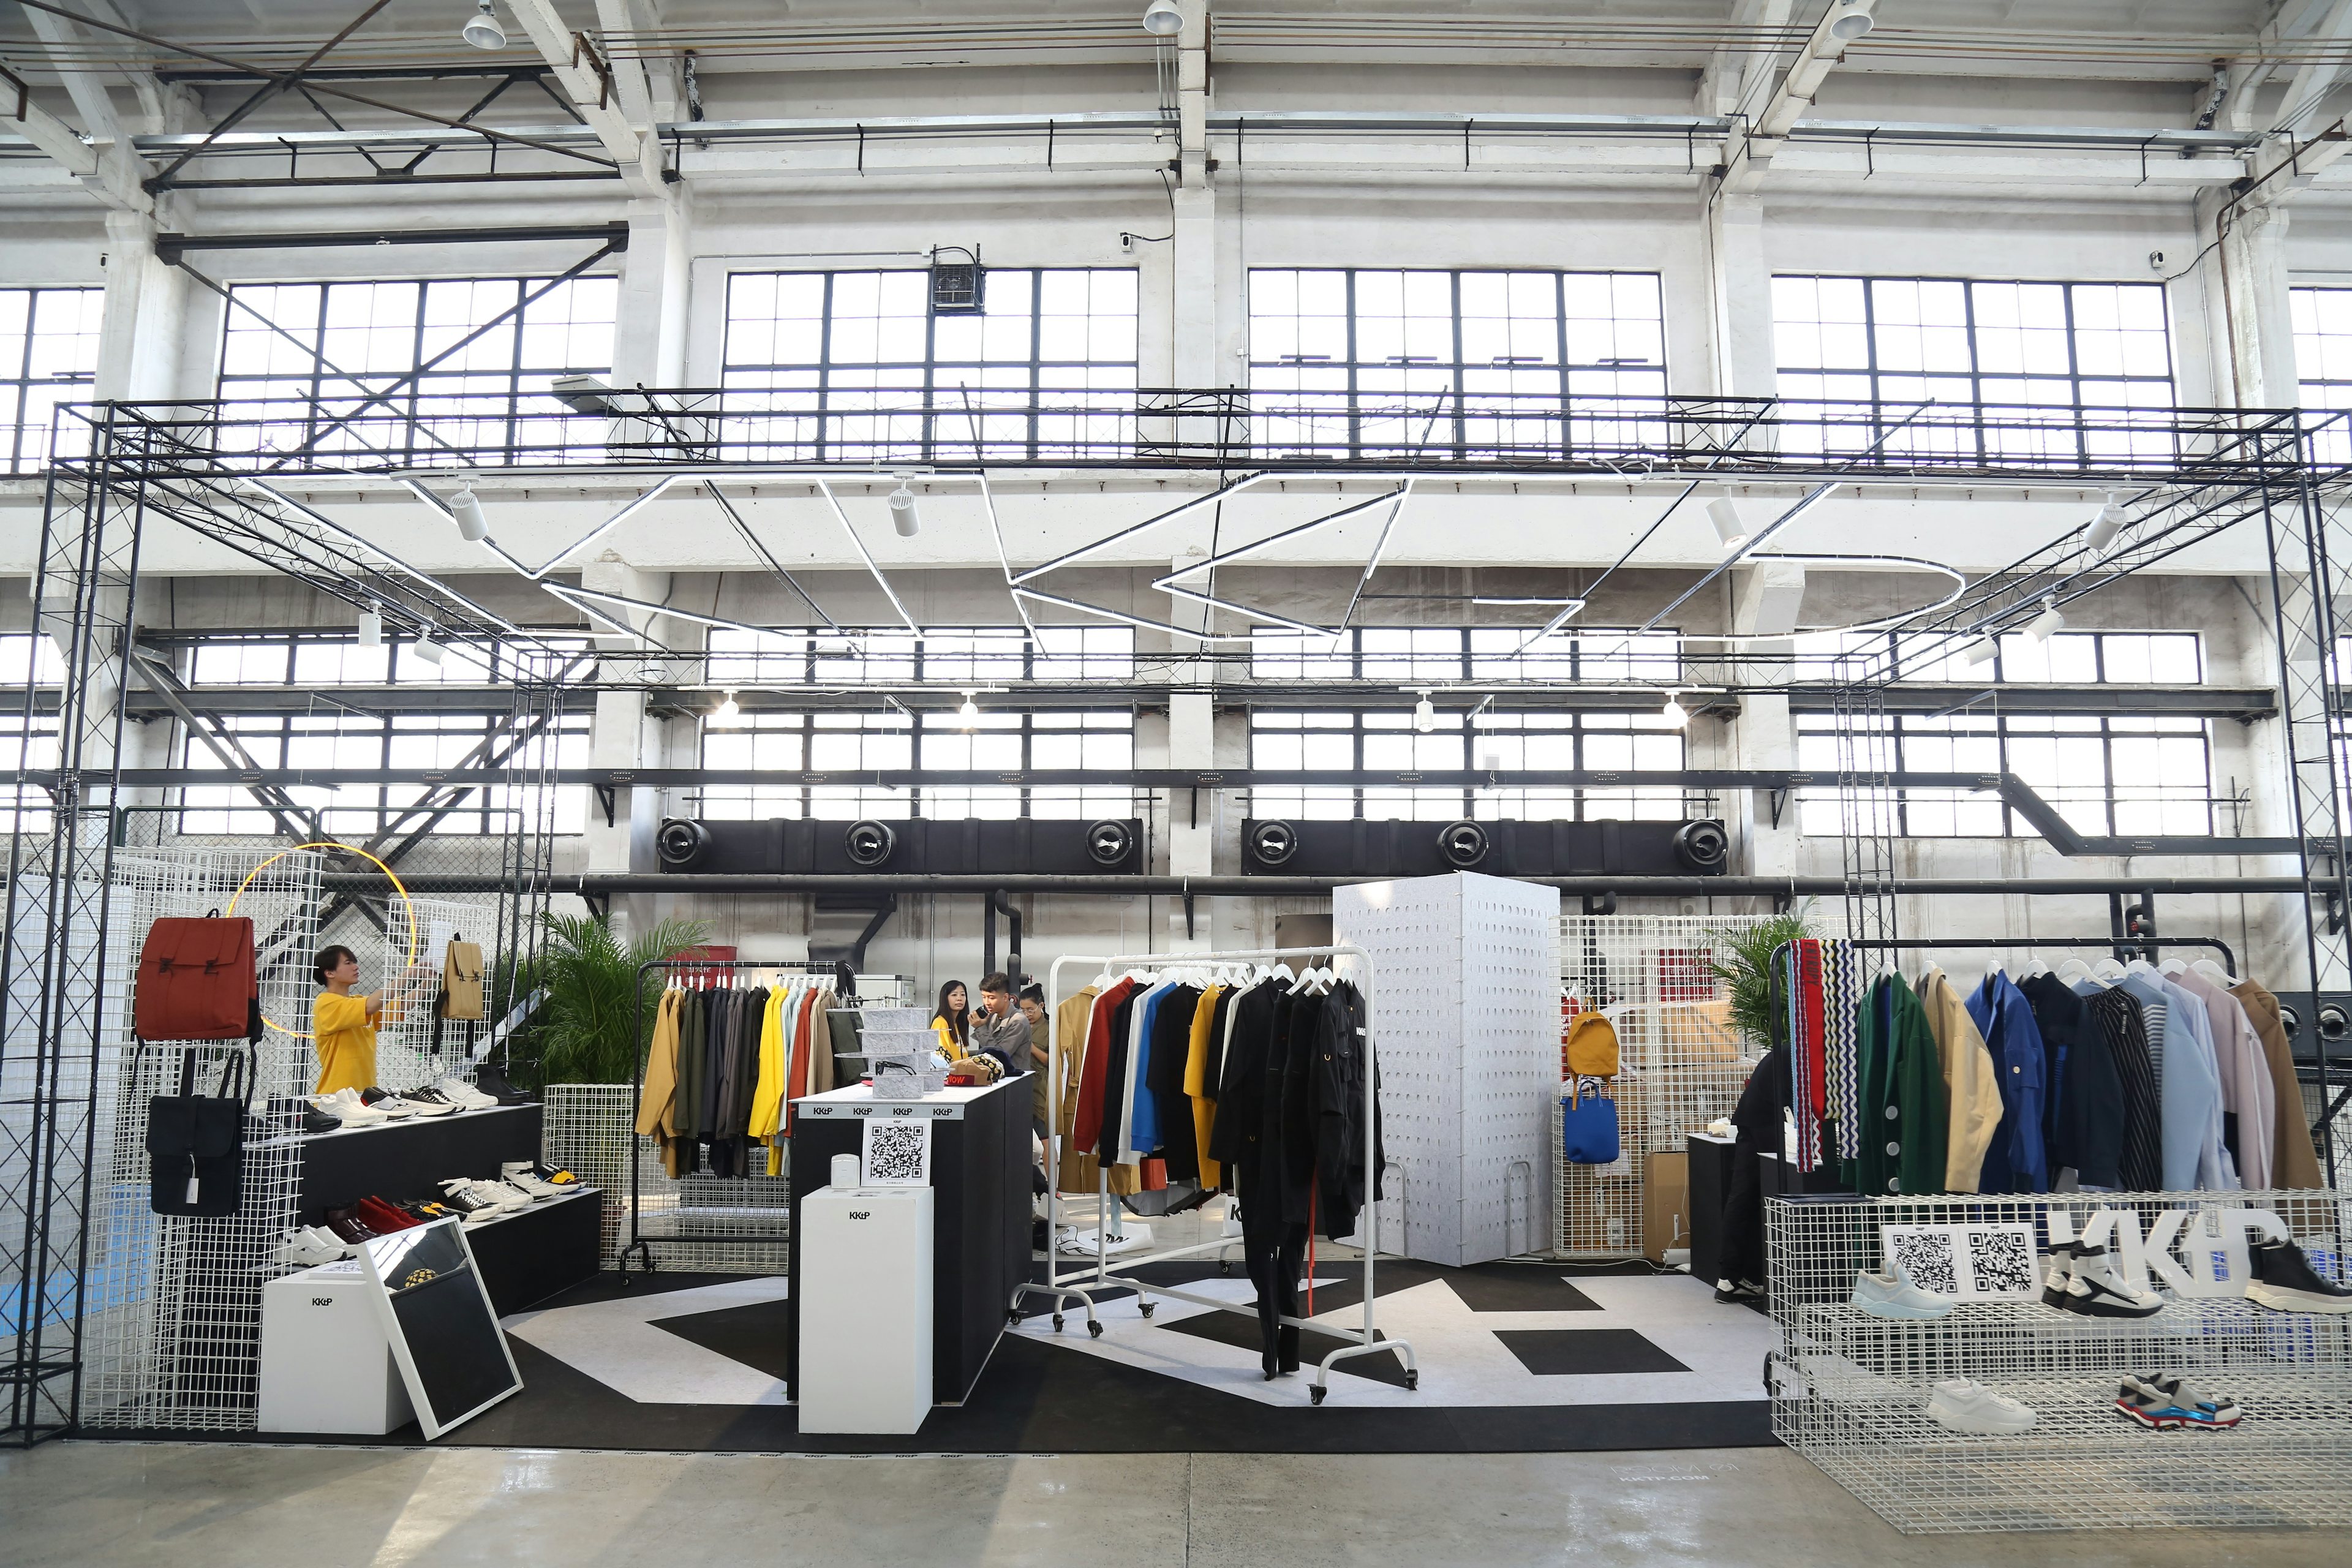 Ontimeshow at Shanghai Fashion Week featured both individual brands and pop-up shop showrooms, like this one featuring Shanghai-based KKtP footwear. (Courtesy Photo)